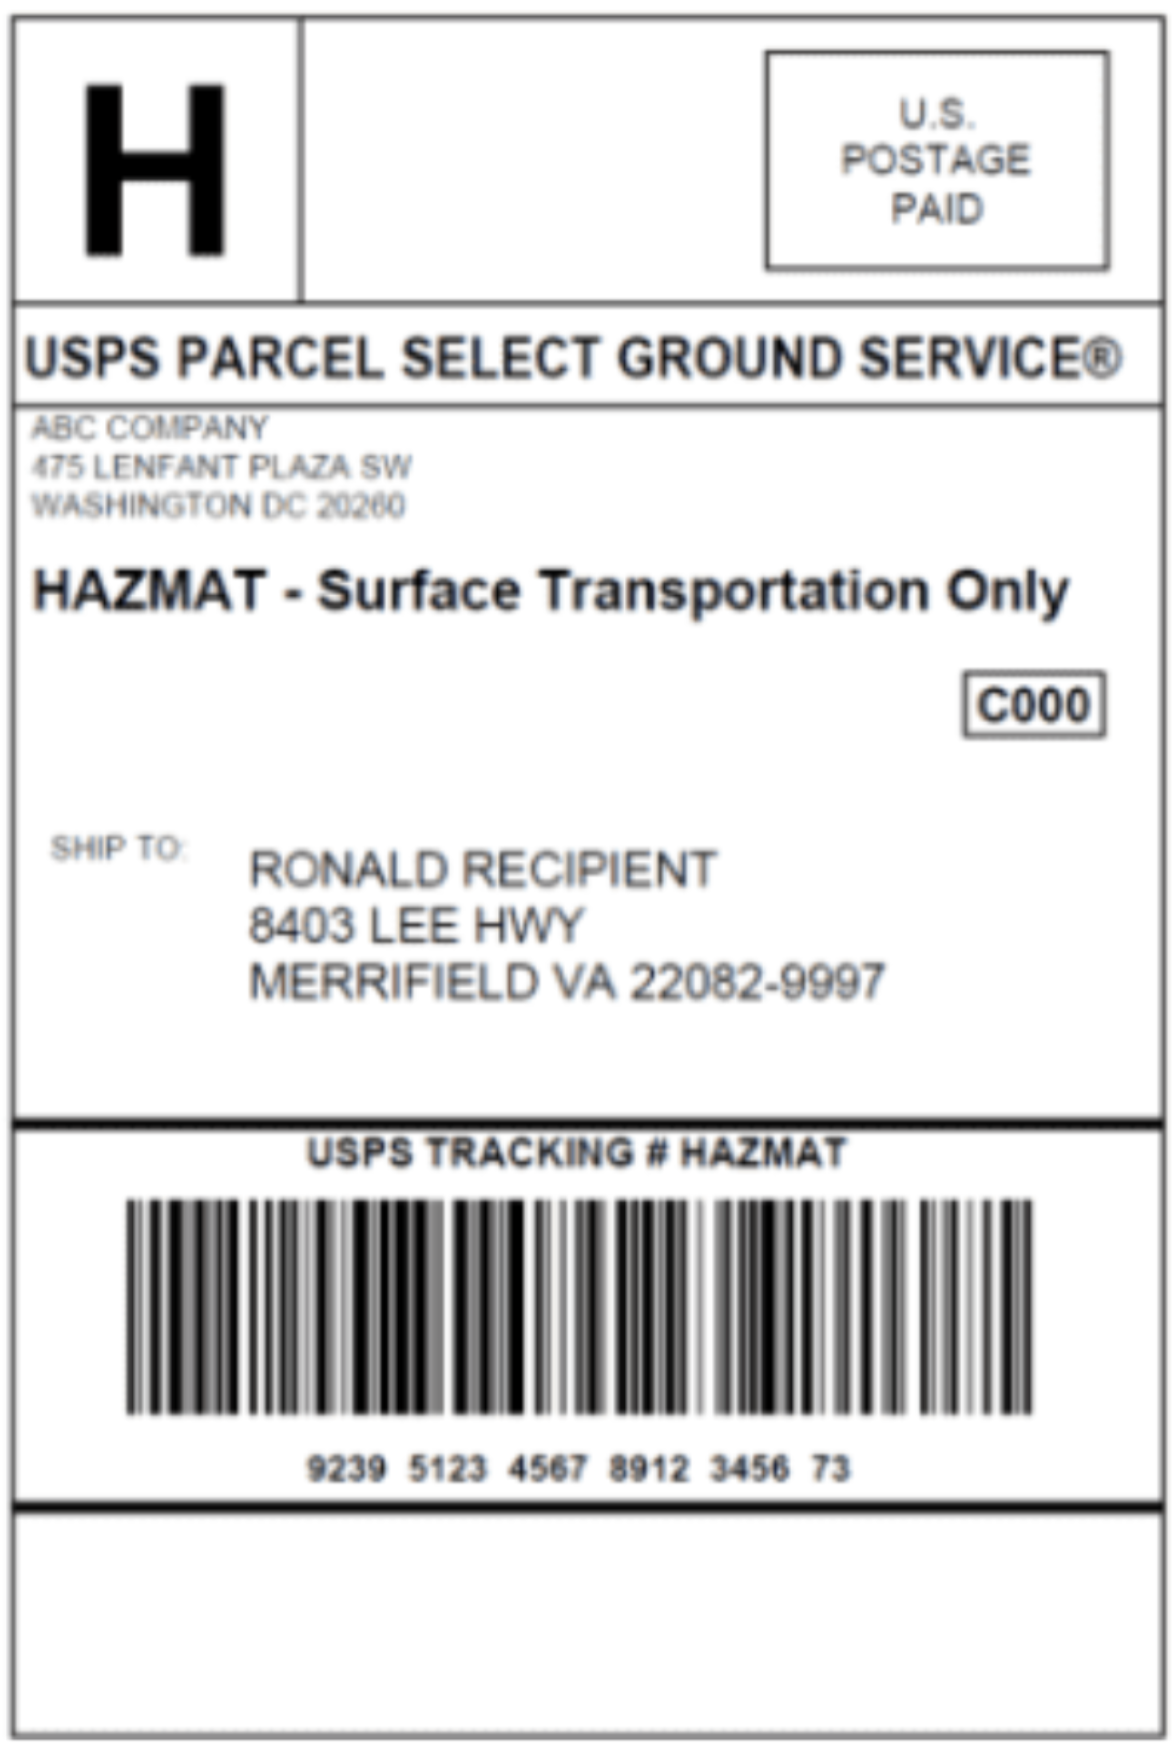 HAZMAT label shows an 'H' and says 'Surface Transportation Only.'